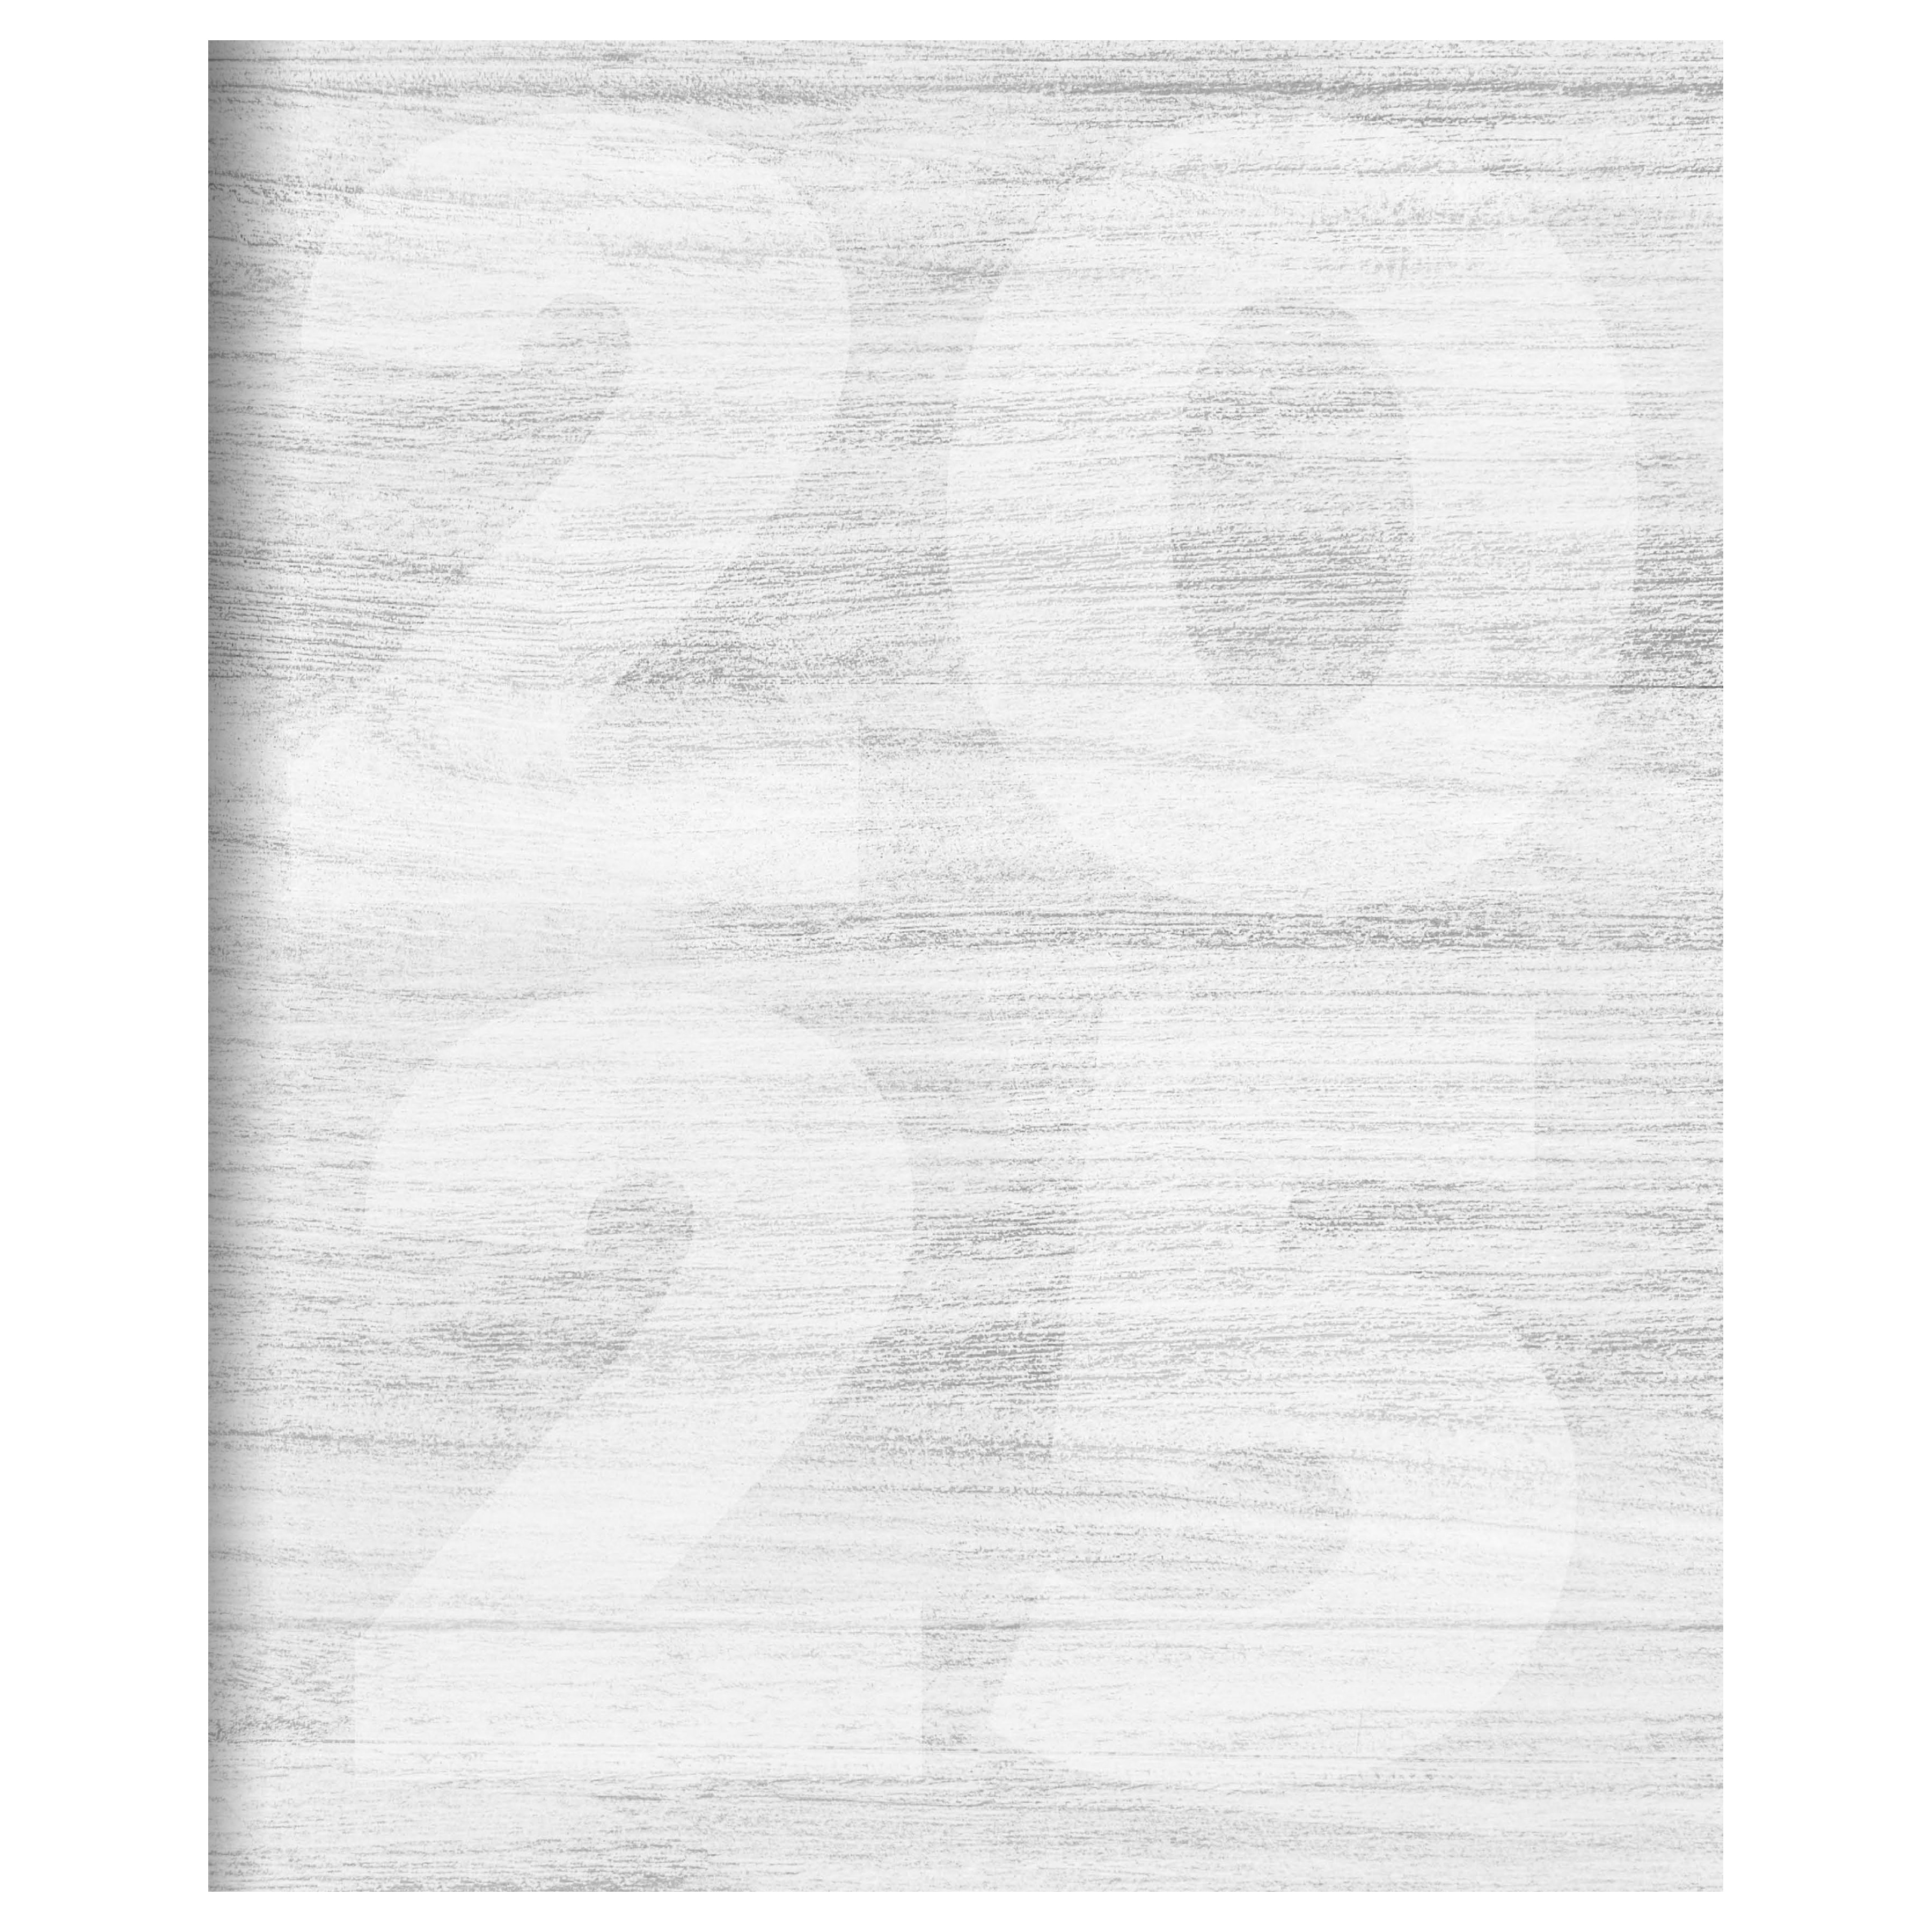 2025 Driftwood - Large Monthly Diary/Planner